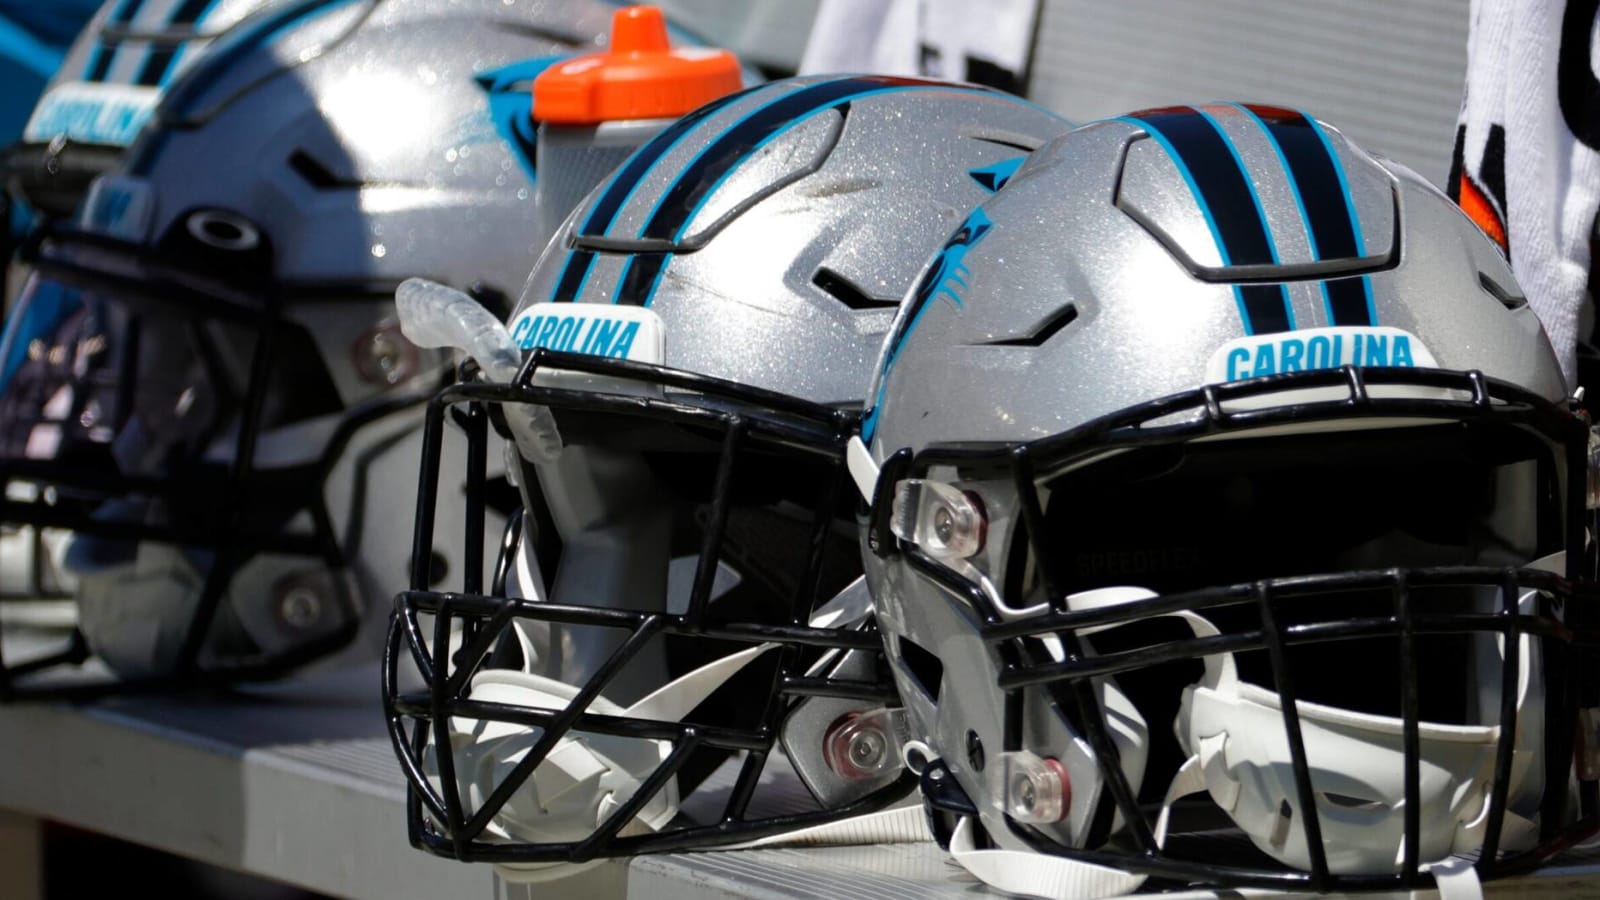 Panthers reveal 2023 uniform schedule, including games with new blue